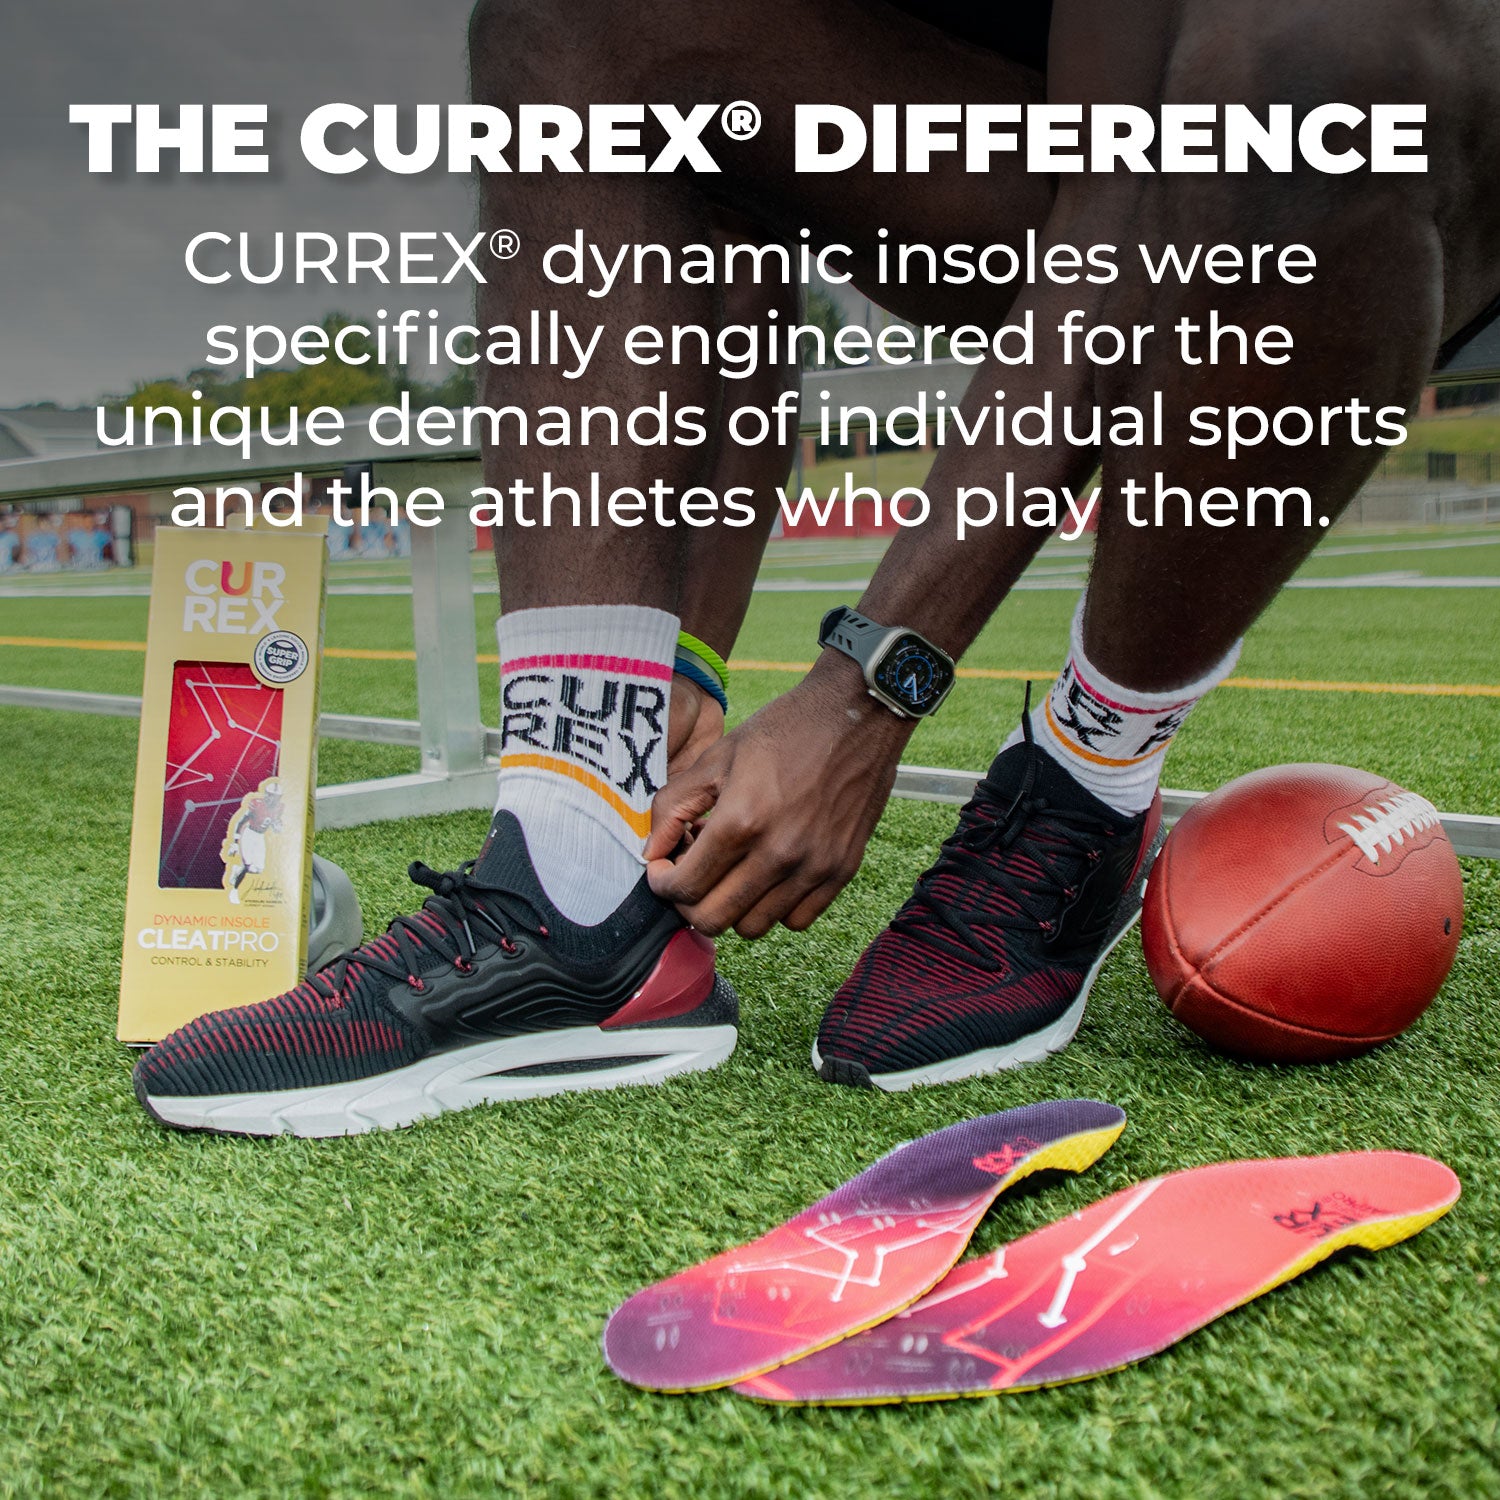 Nyck Harbor wearing CURREX socks, sitting on bench in field with football and CURREX CLEATPRO insoles. The CURREX® Difference: CURREX® dynamic insoles were specifically engineered for the unique demands of individual sports and the athletes who play them.